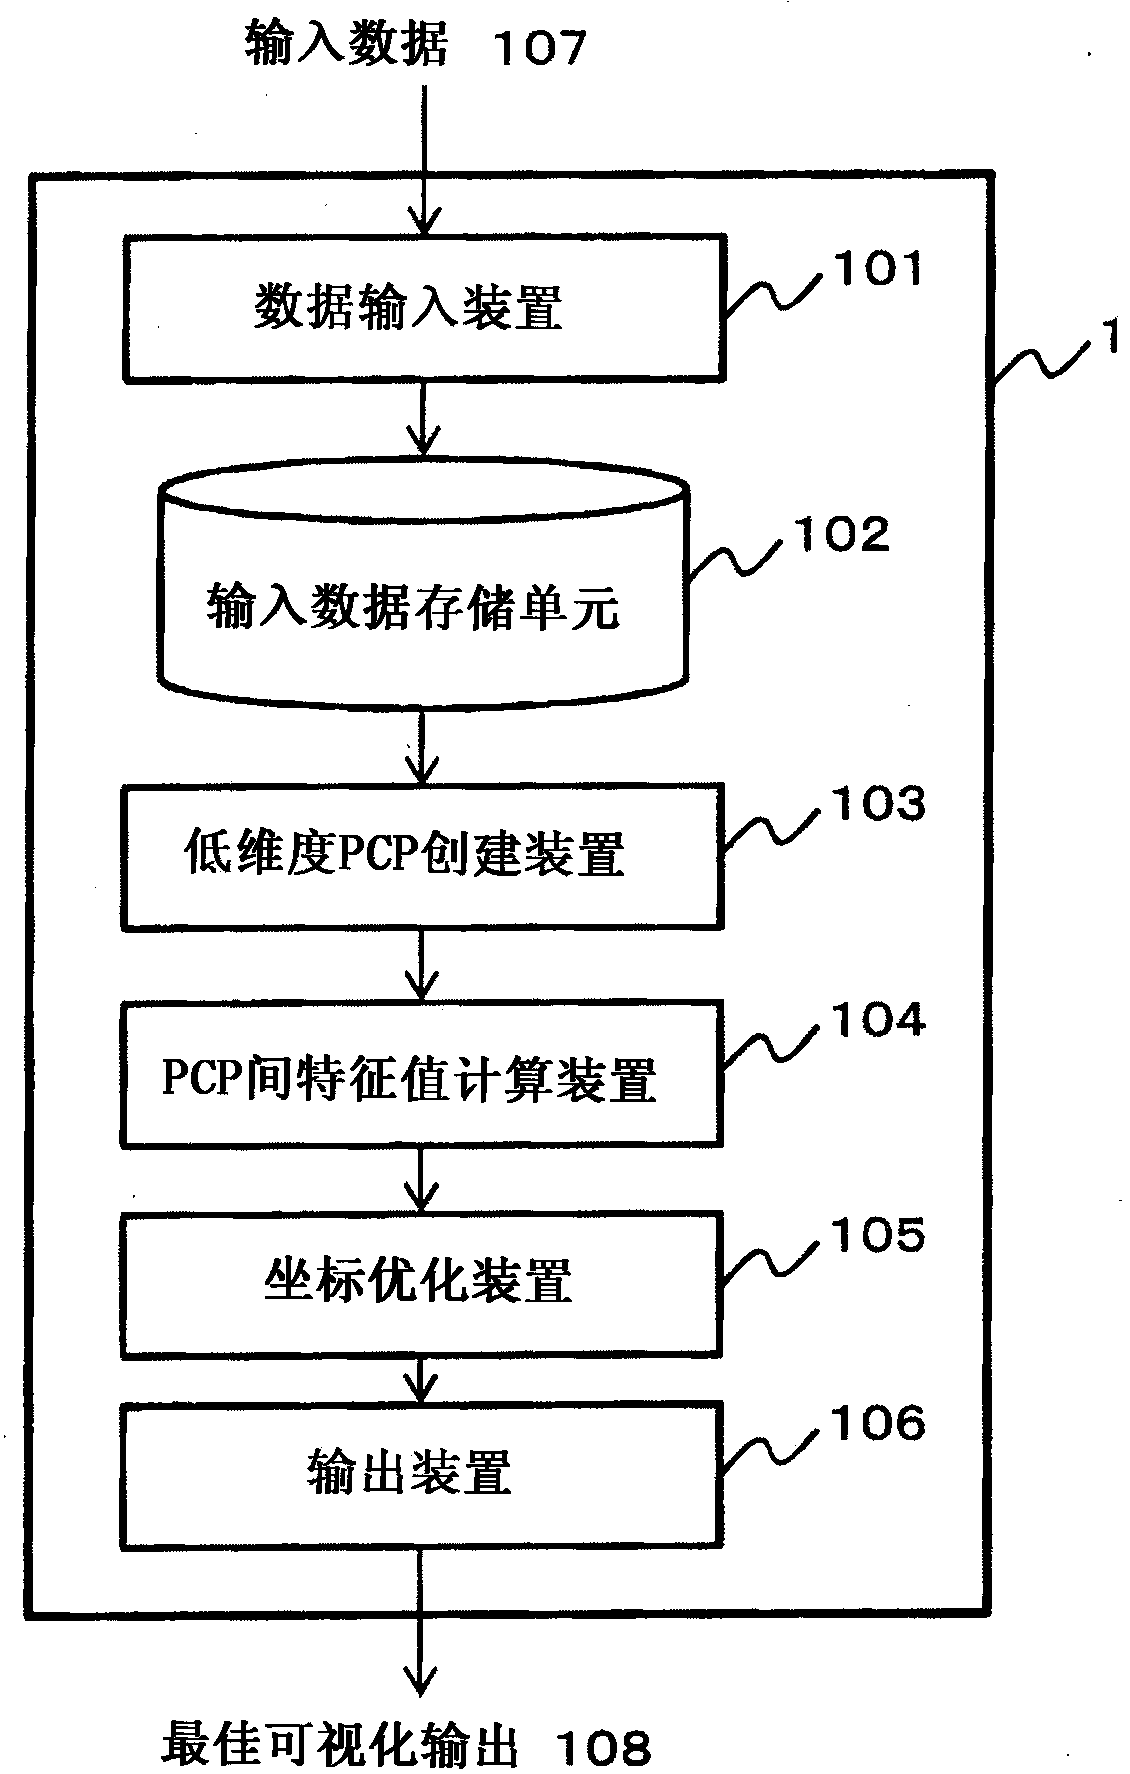 Device, method, and program for visualization of multi-dimensional data